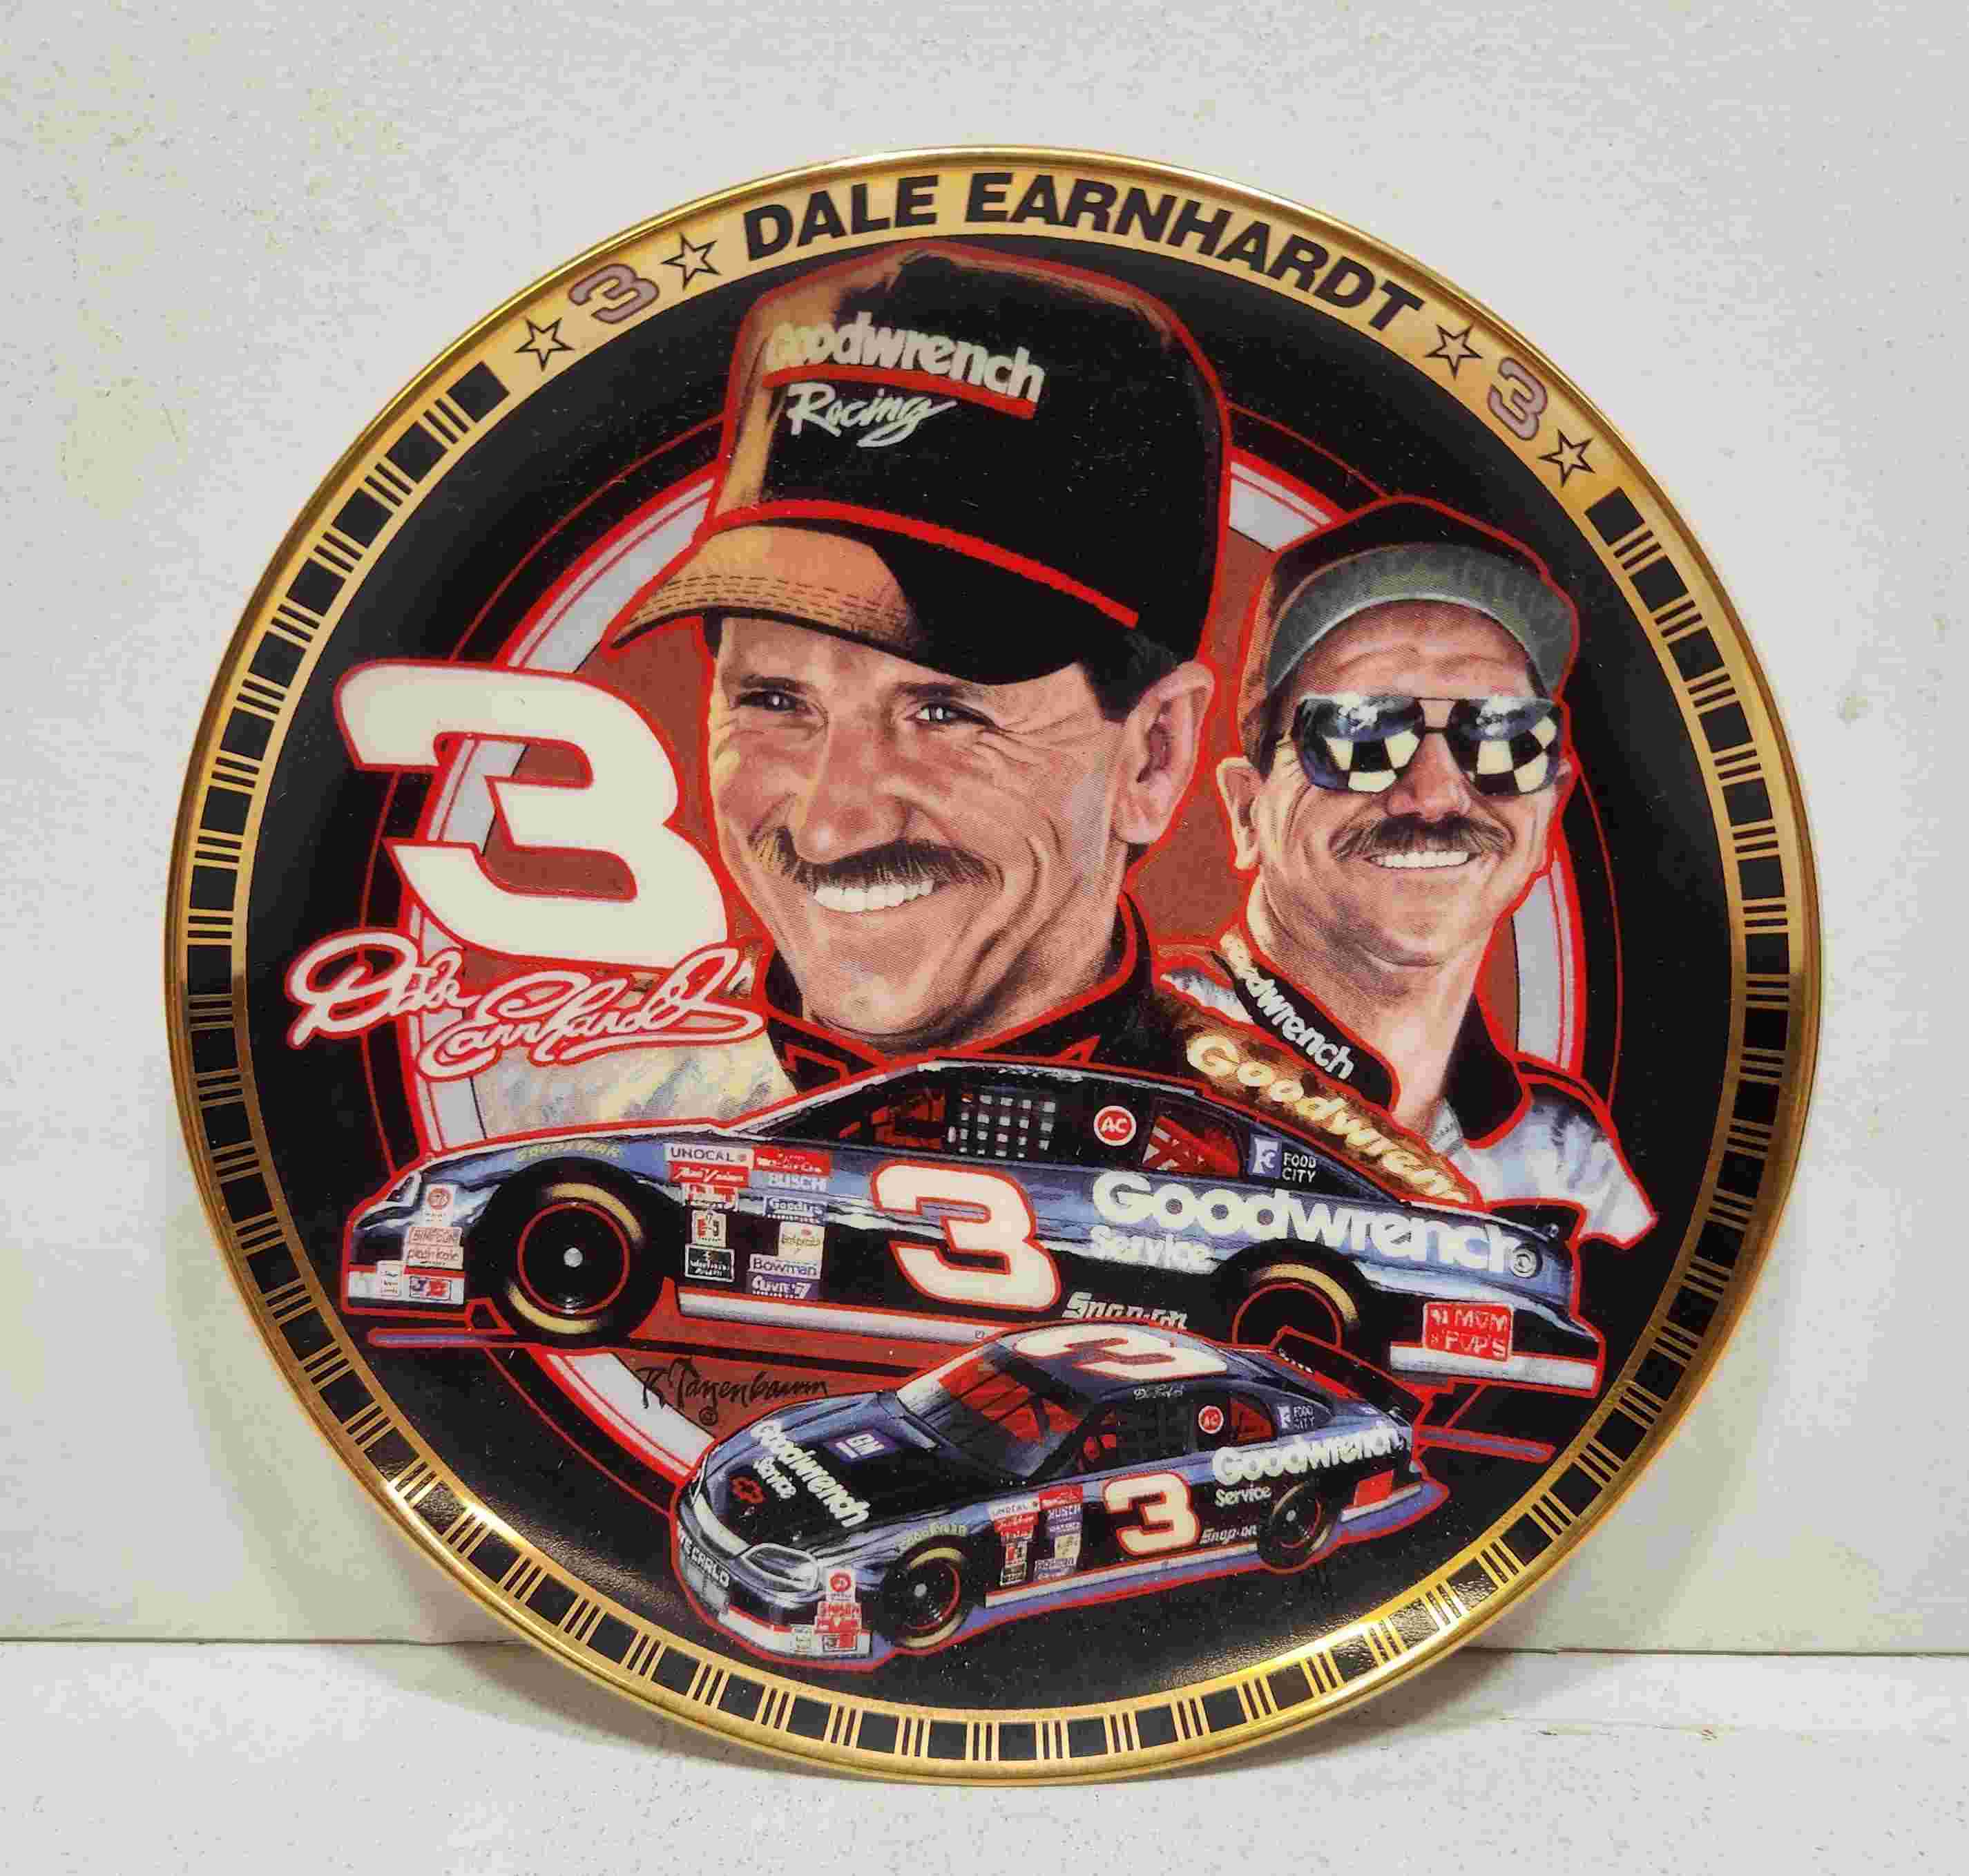 1995 Dale Earnhardt Drivers of Victory Lane by The Hamilton Collection